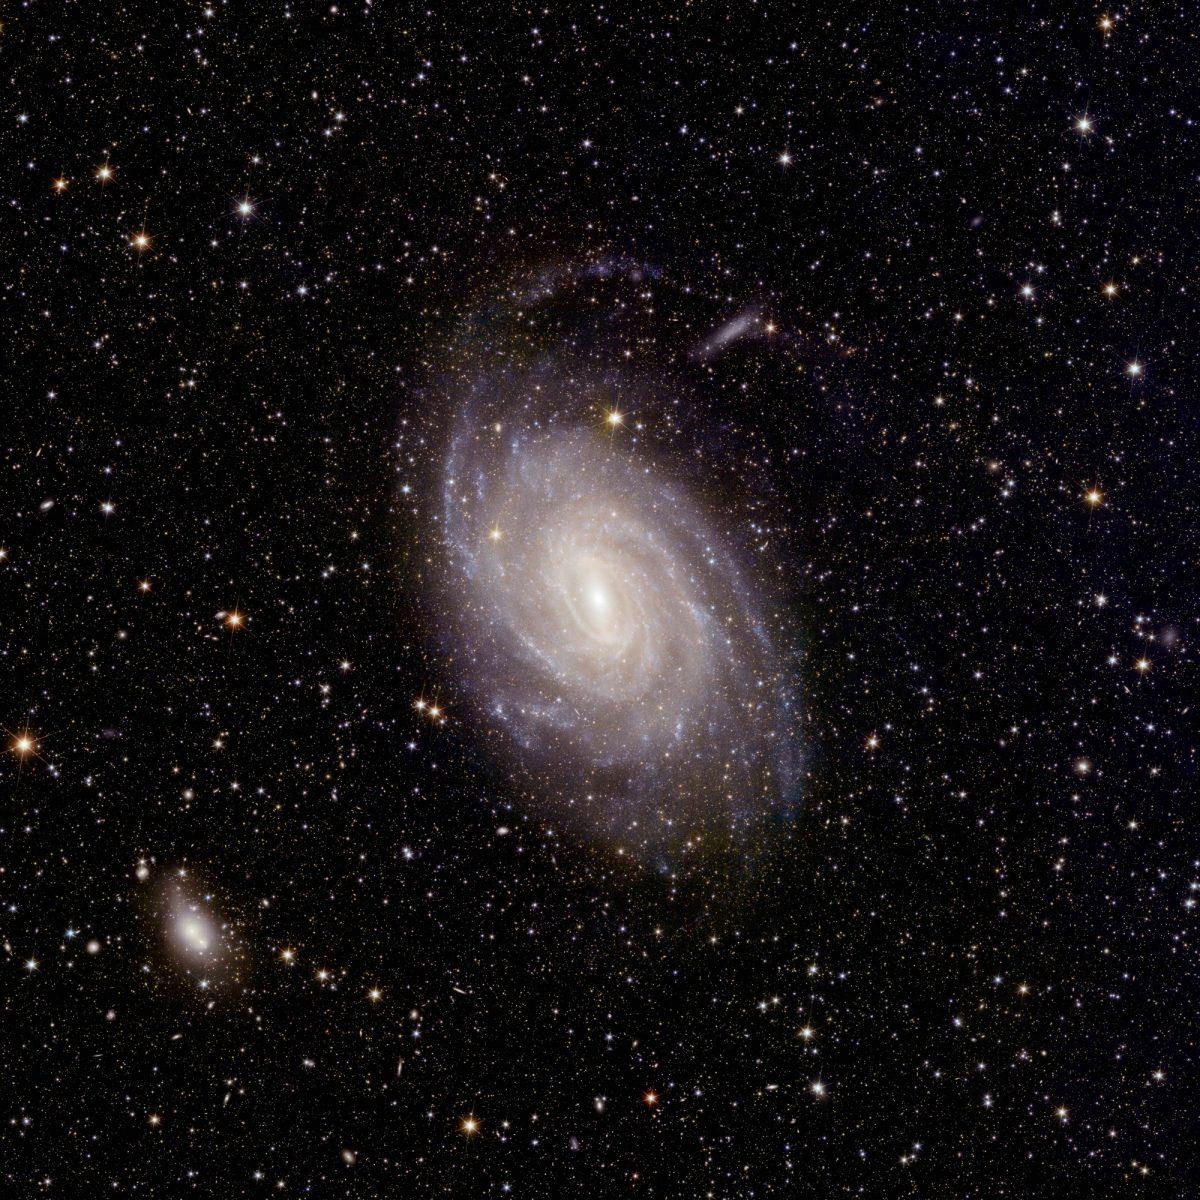 A large spiral galaxy in space, captured by Euclid.